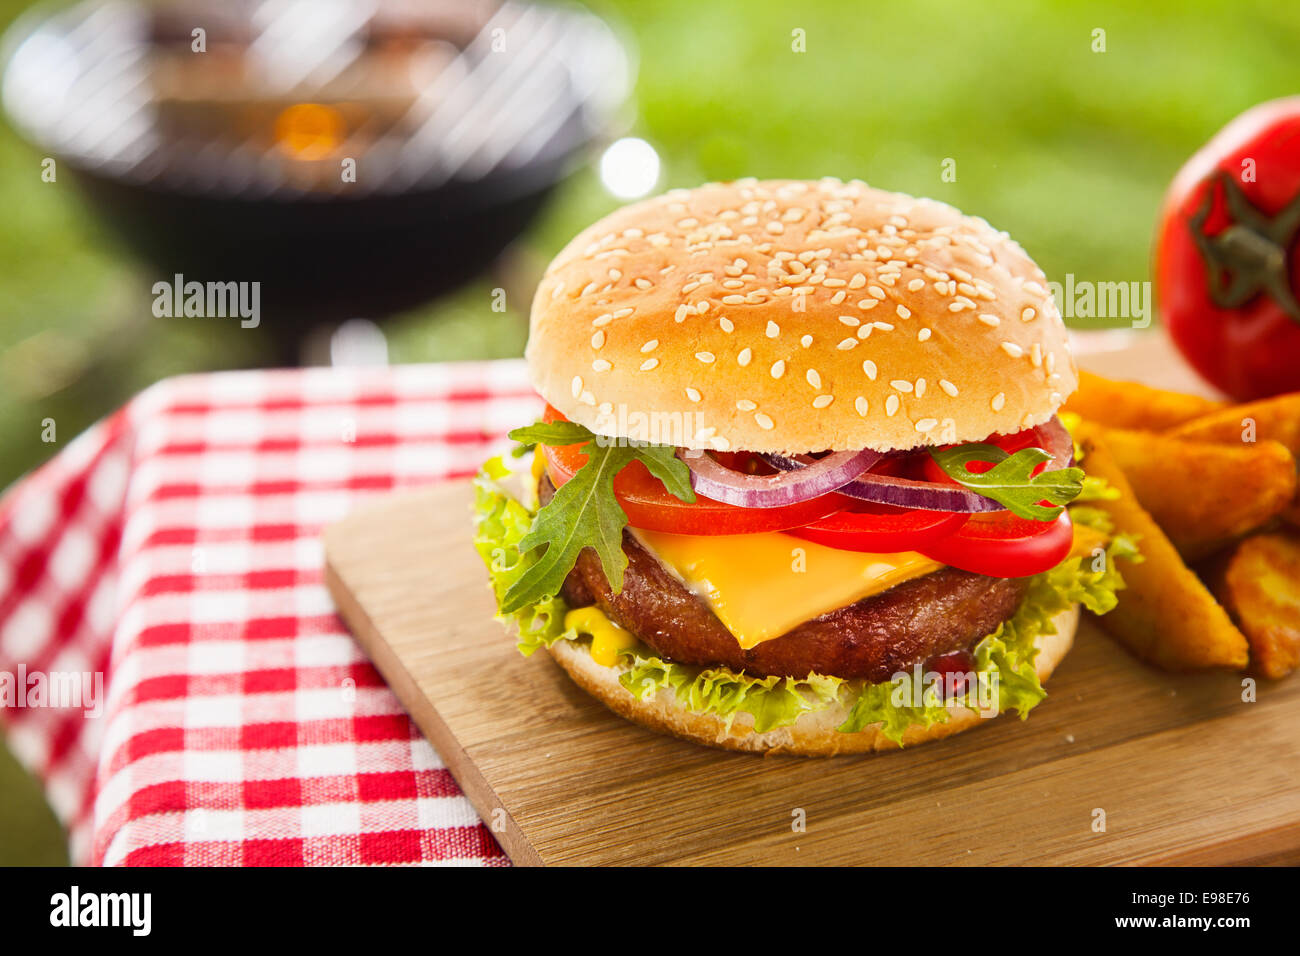 Tasty cheeseburger with melted cheddar cheese dripping over ground beef burger garnished with fresh salad ingredients and served on a wooden table on an outdoor picnic table Stock Photo